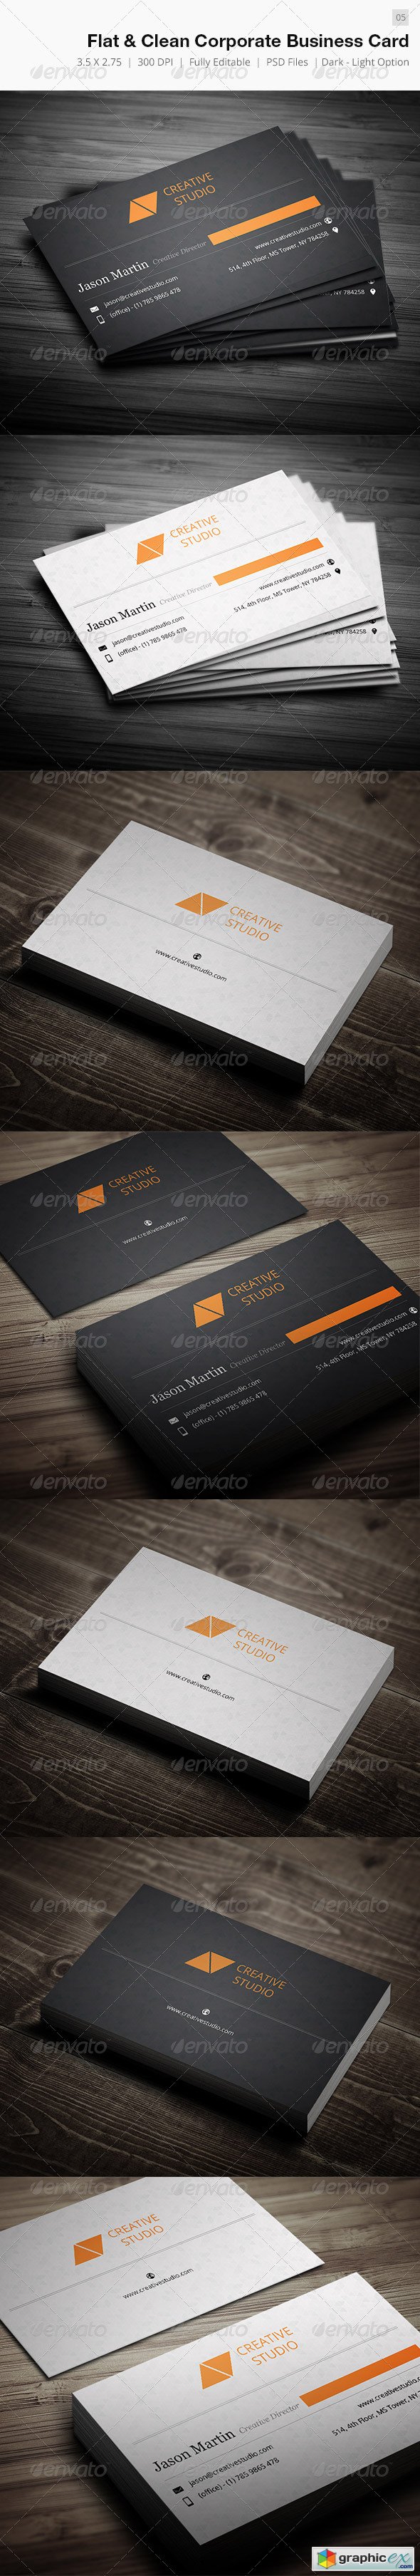 Dual Clean Corporate Business Card - 05